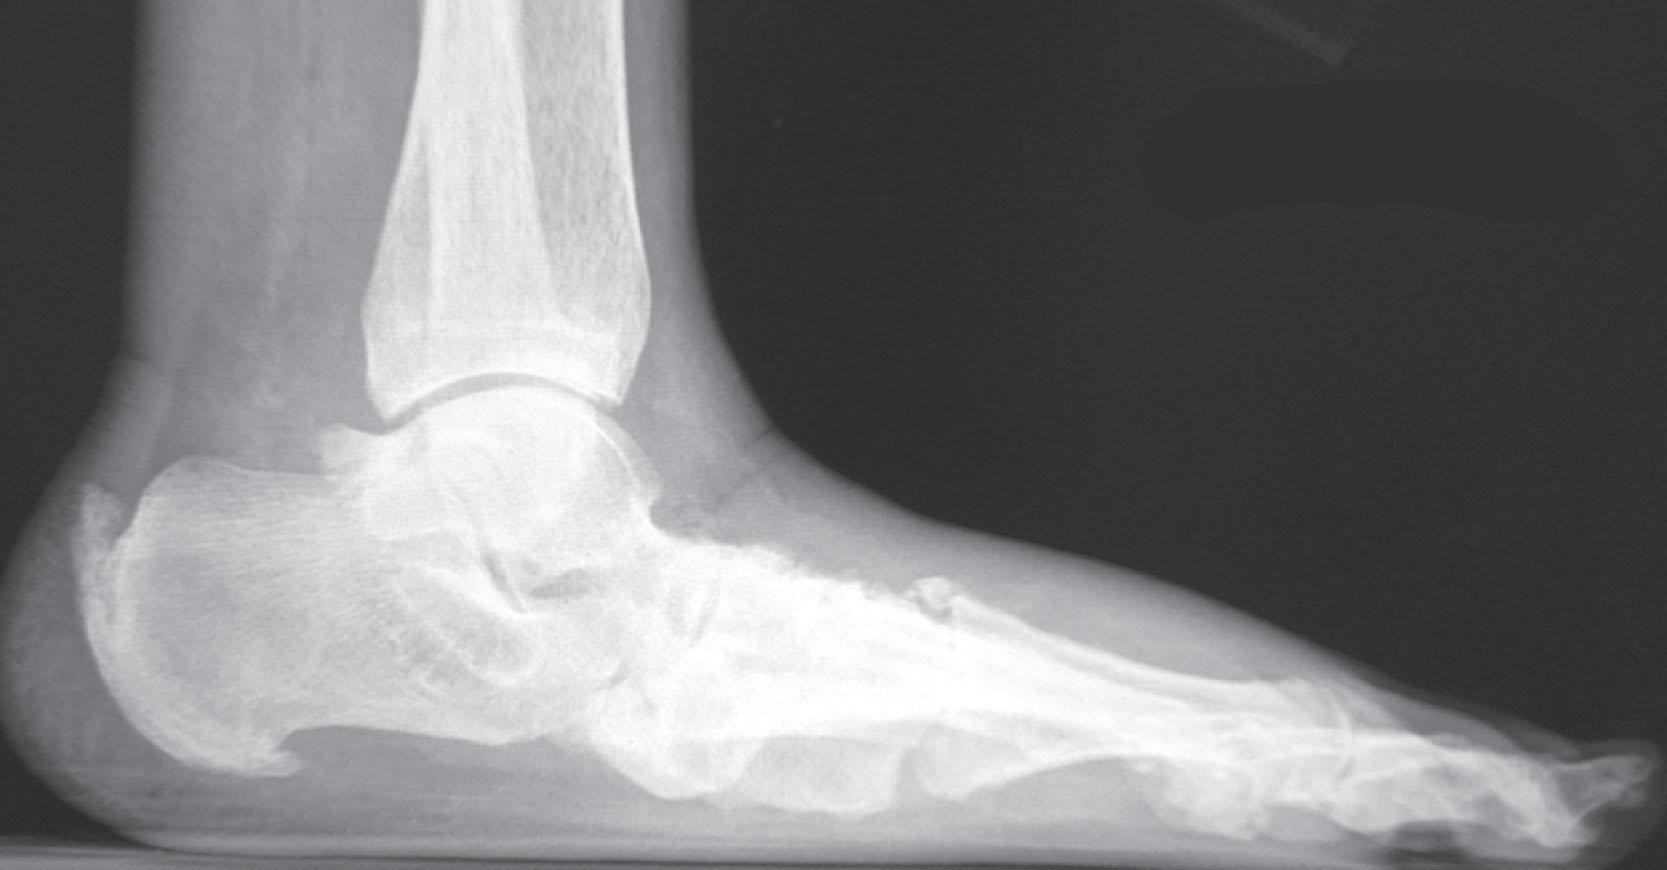 Fig. 21-26, Midfoot arch collapse with migration of the talar head plantarward.